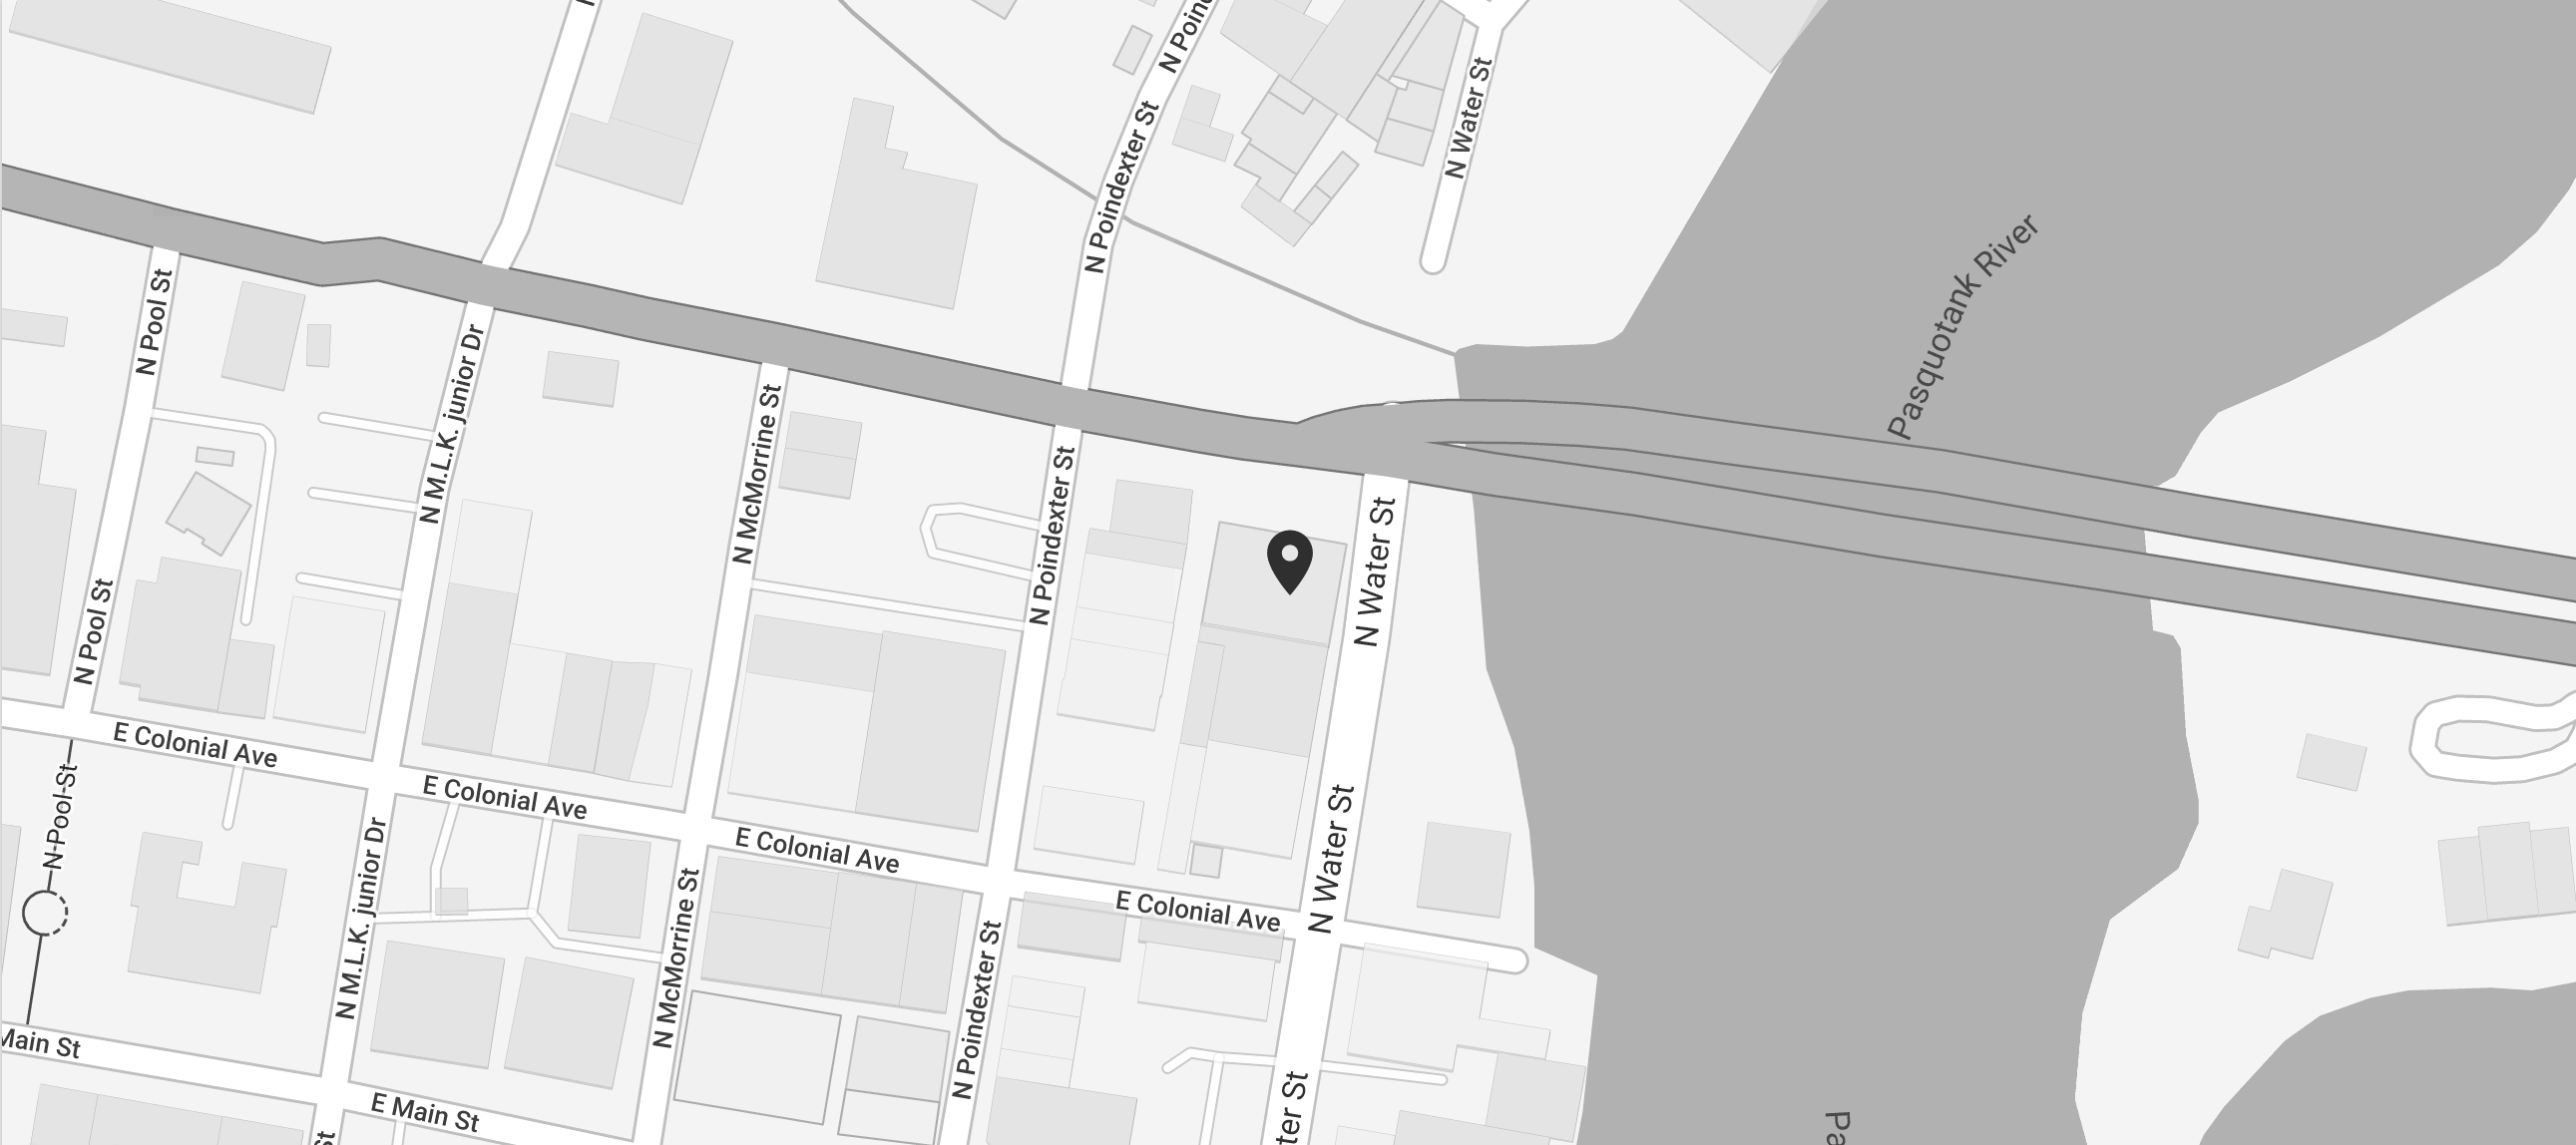 A snippet of a map to Weatherly Lofts